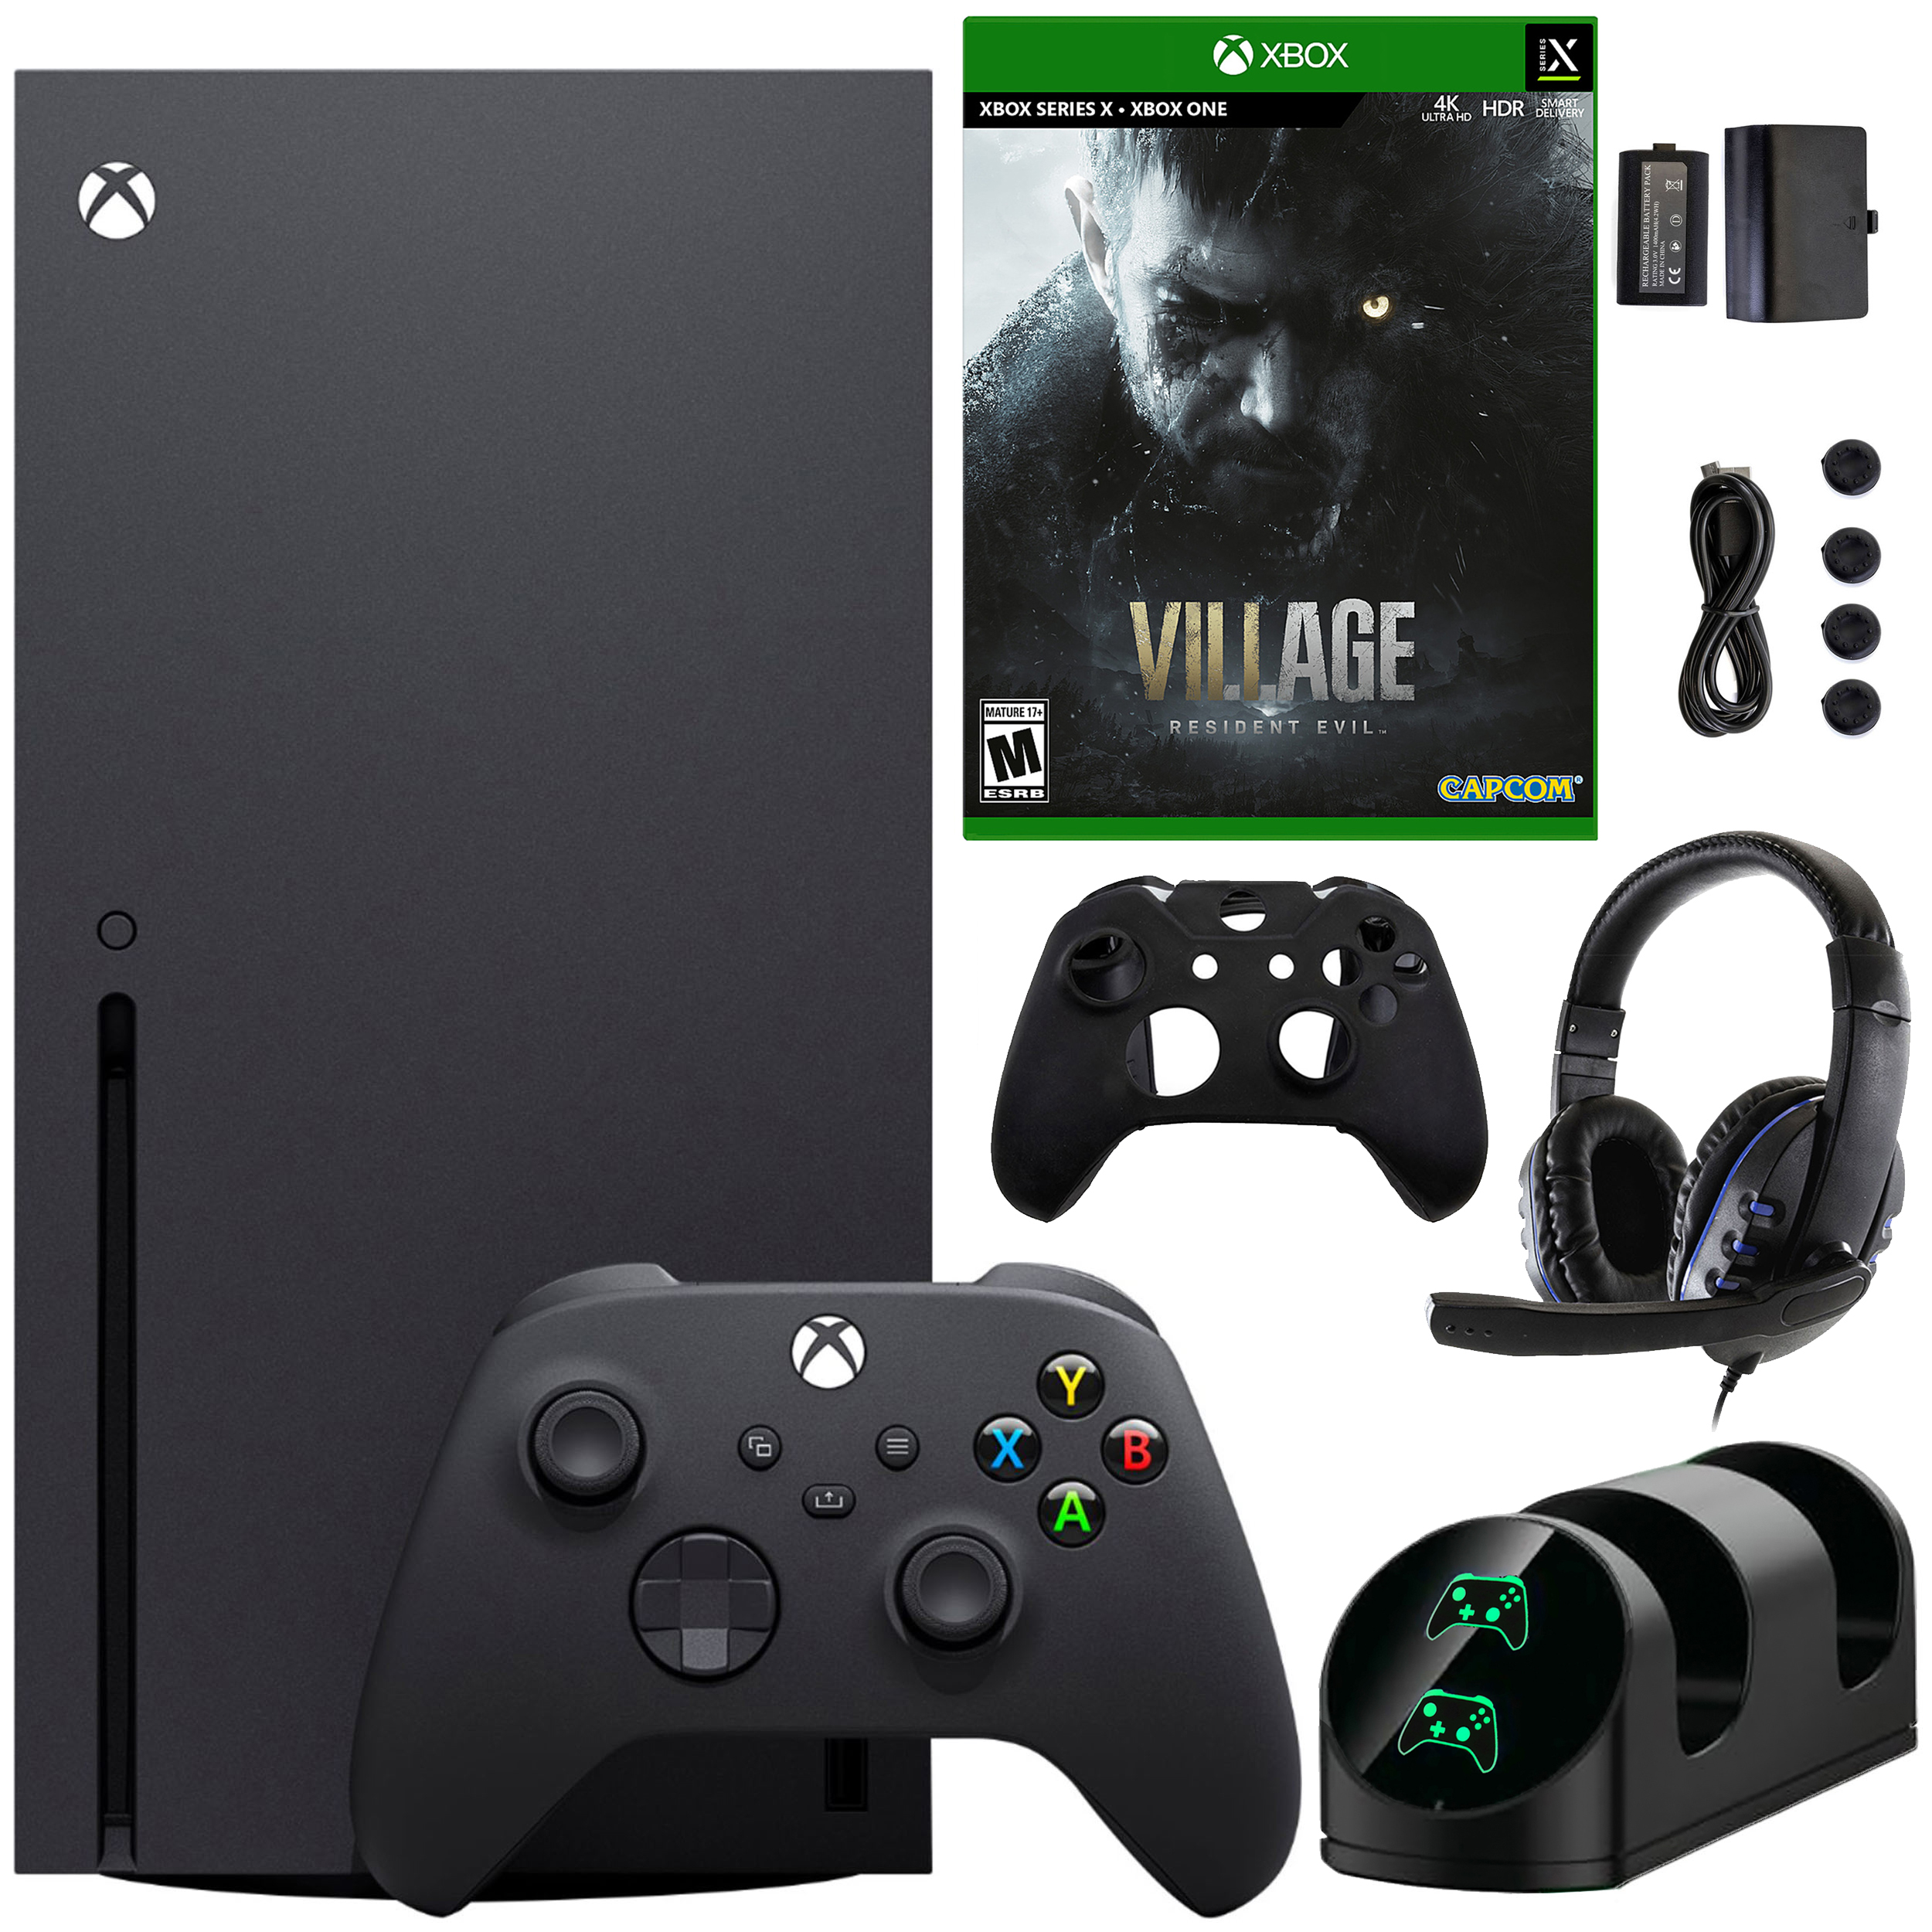 Microsoft Xbox Series X 1TB Console with Accessories Kit and Resident Evil:  Village Game